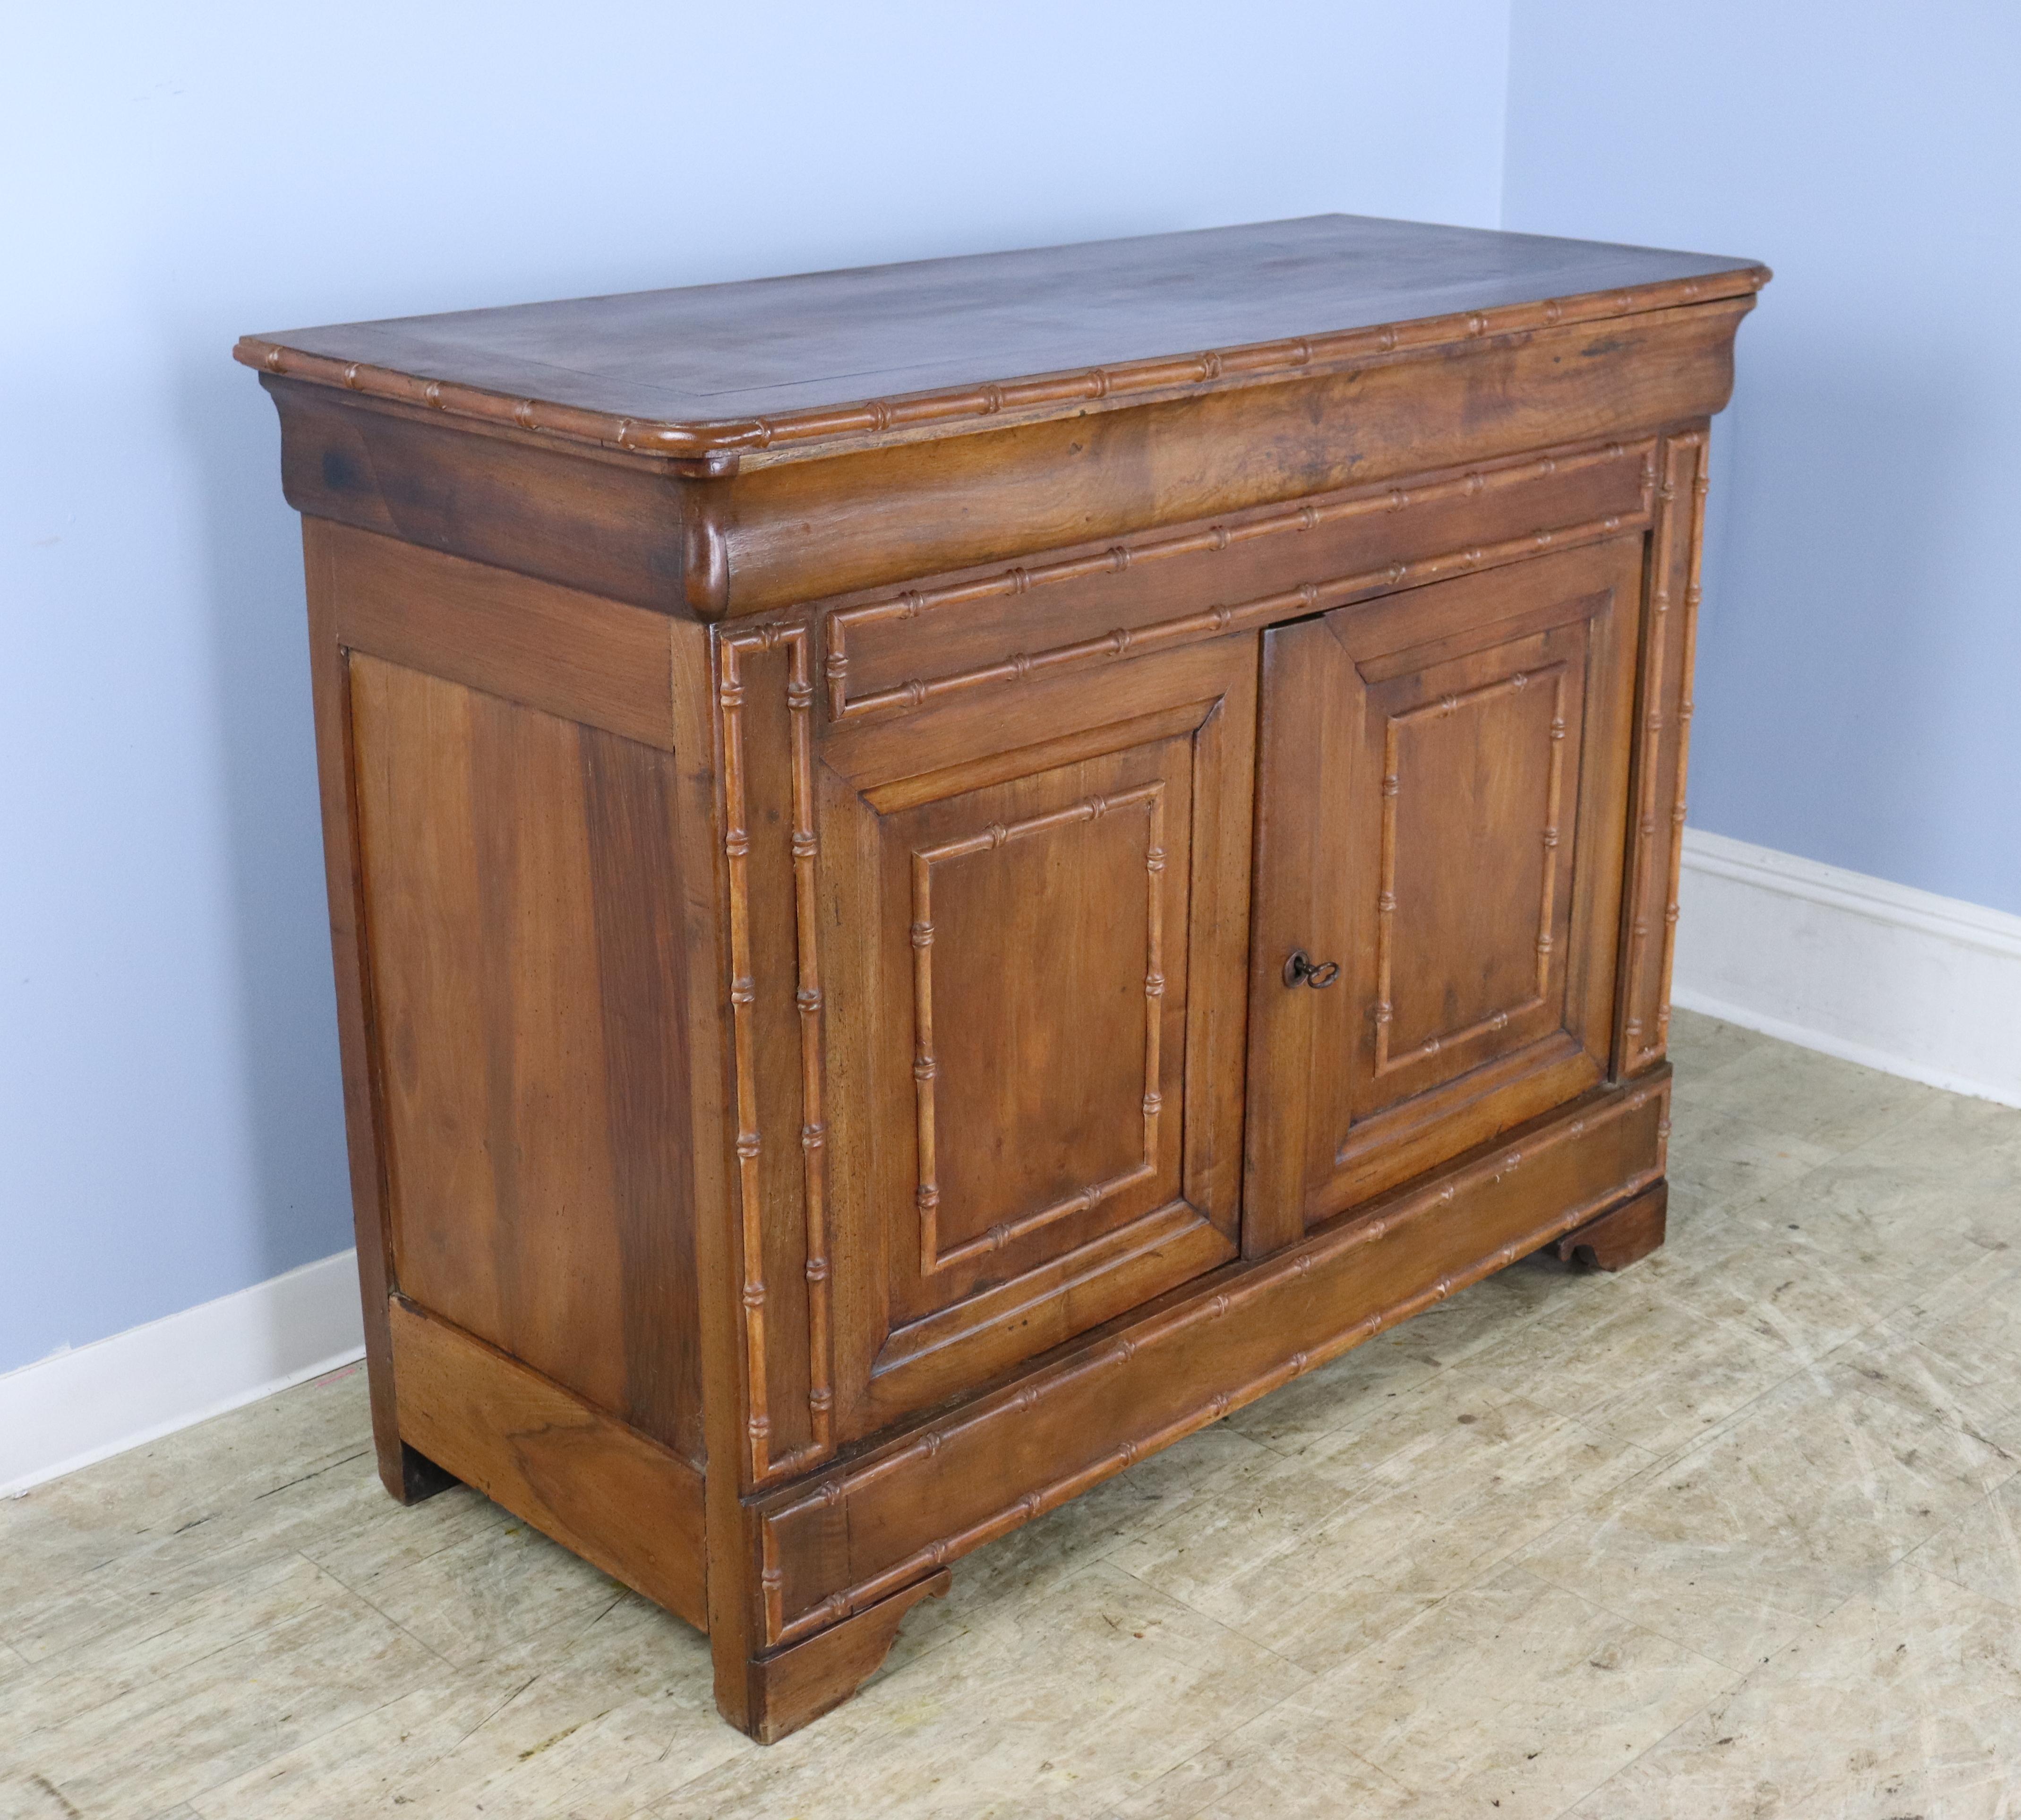 A stately Louis Philippe style walnut buffet with charming faux bamboo mouldings and edge, and a suprpising flip top!  Beautiful walnut color, grain and patina.  The top flips up to reveal a clean and roomy storage space for cutlery, linens, or